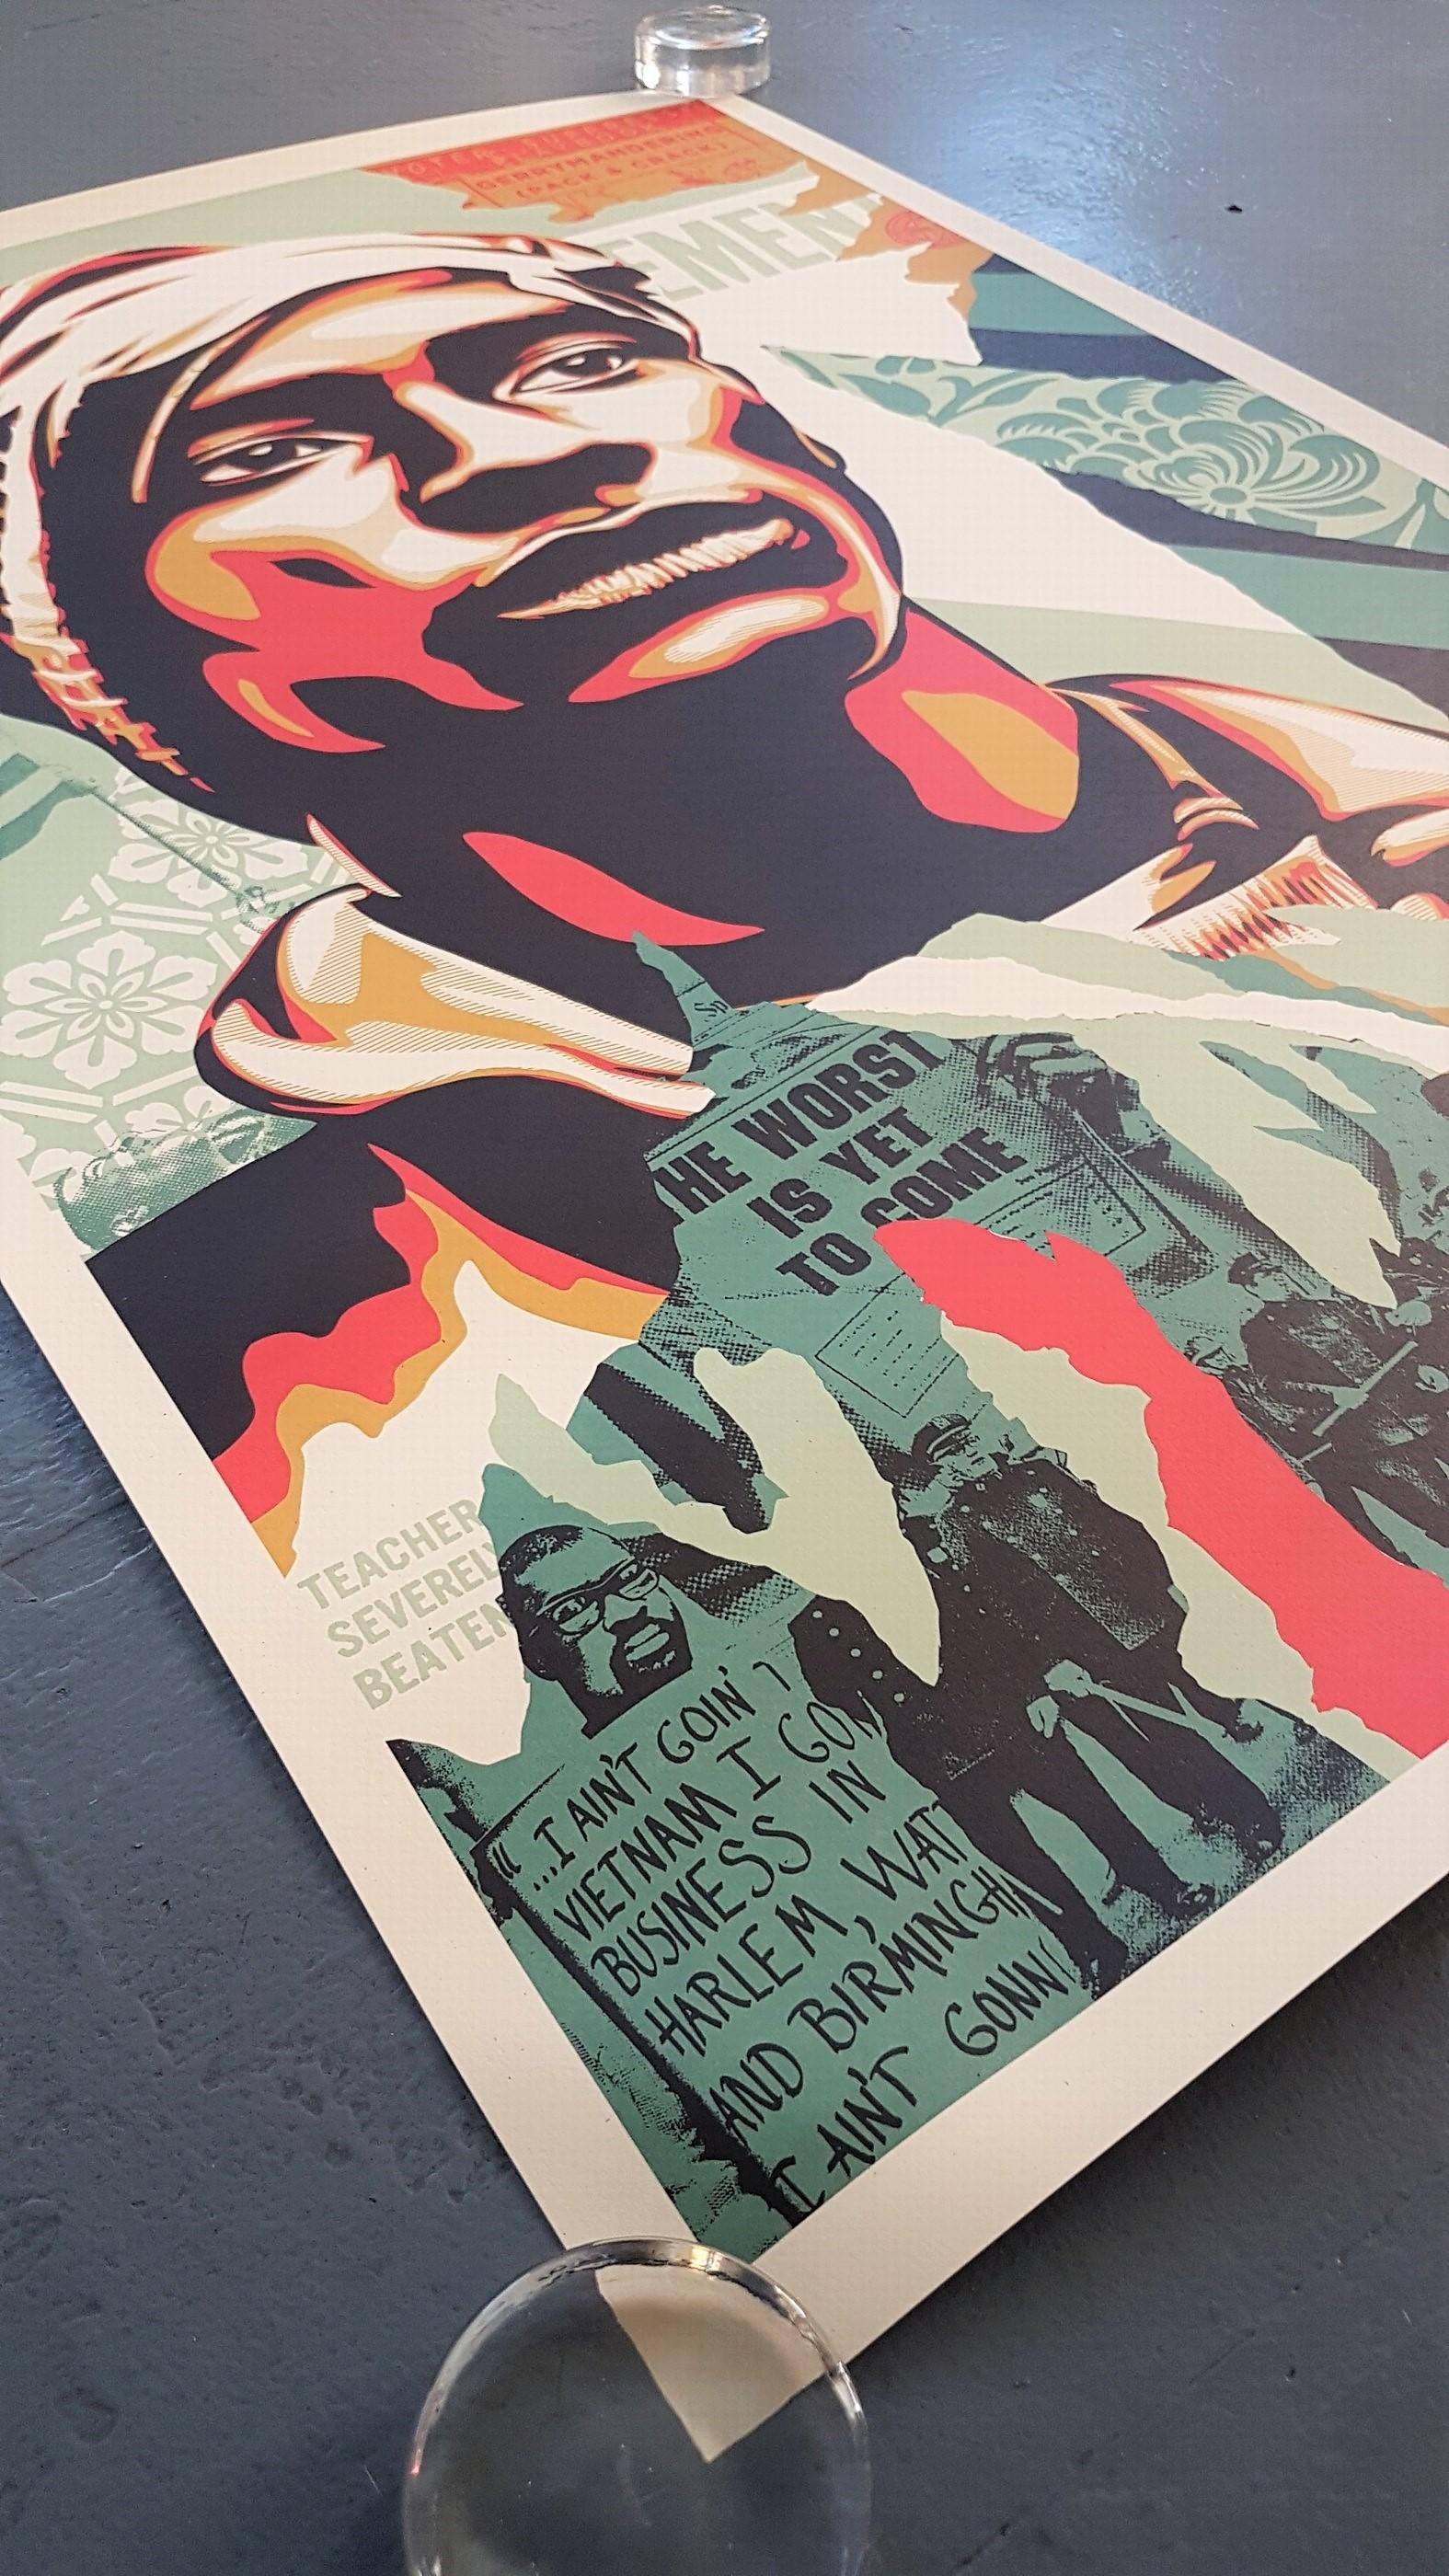 Shepard Fairey
Voting Rights are Human Rights 
Offset lithograph on paper
Year: 2020-2021
Signed and dated by hand
Size: 33.7 × 22.2 on 35.7 × 23.8 inches
COA provided

Frank Shepard Fairey (born February 15, 1970) is an American contemporary street